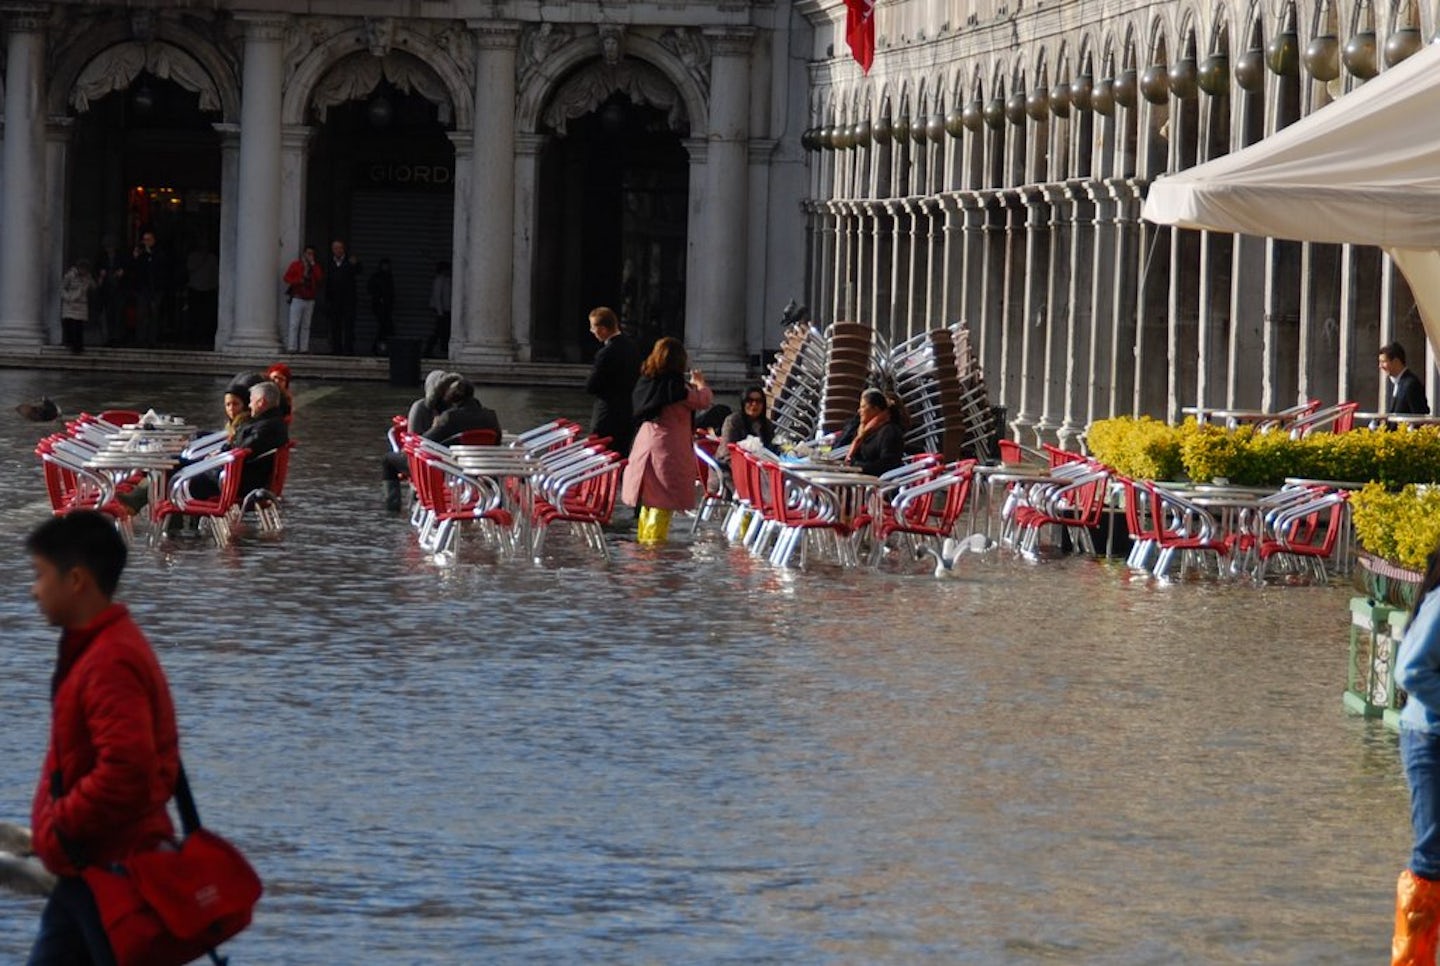 People enjoying their day at an outdoor cafe in St Marks Square in Venice during the flooding season